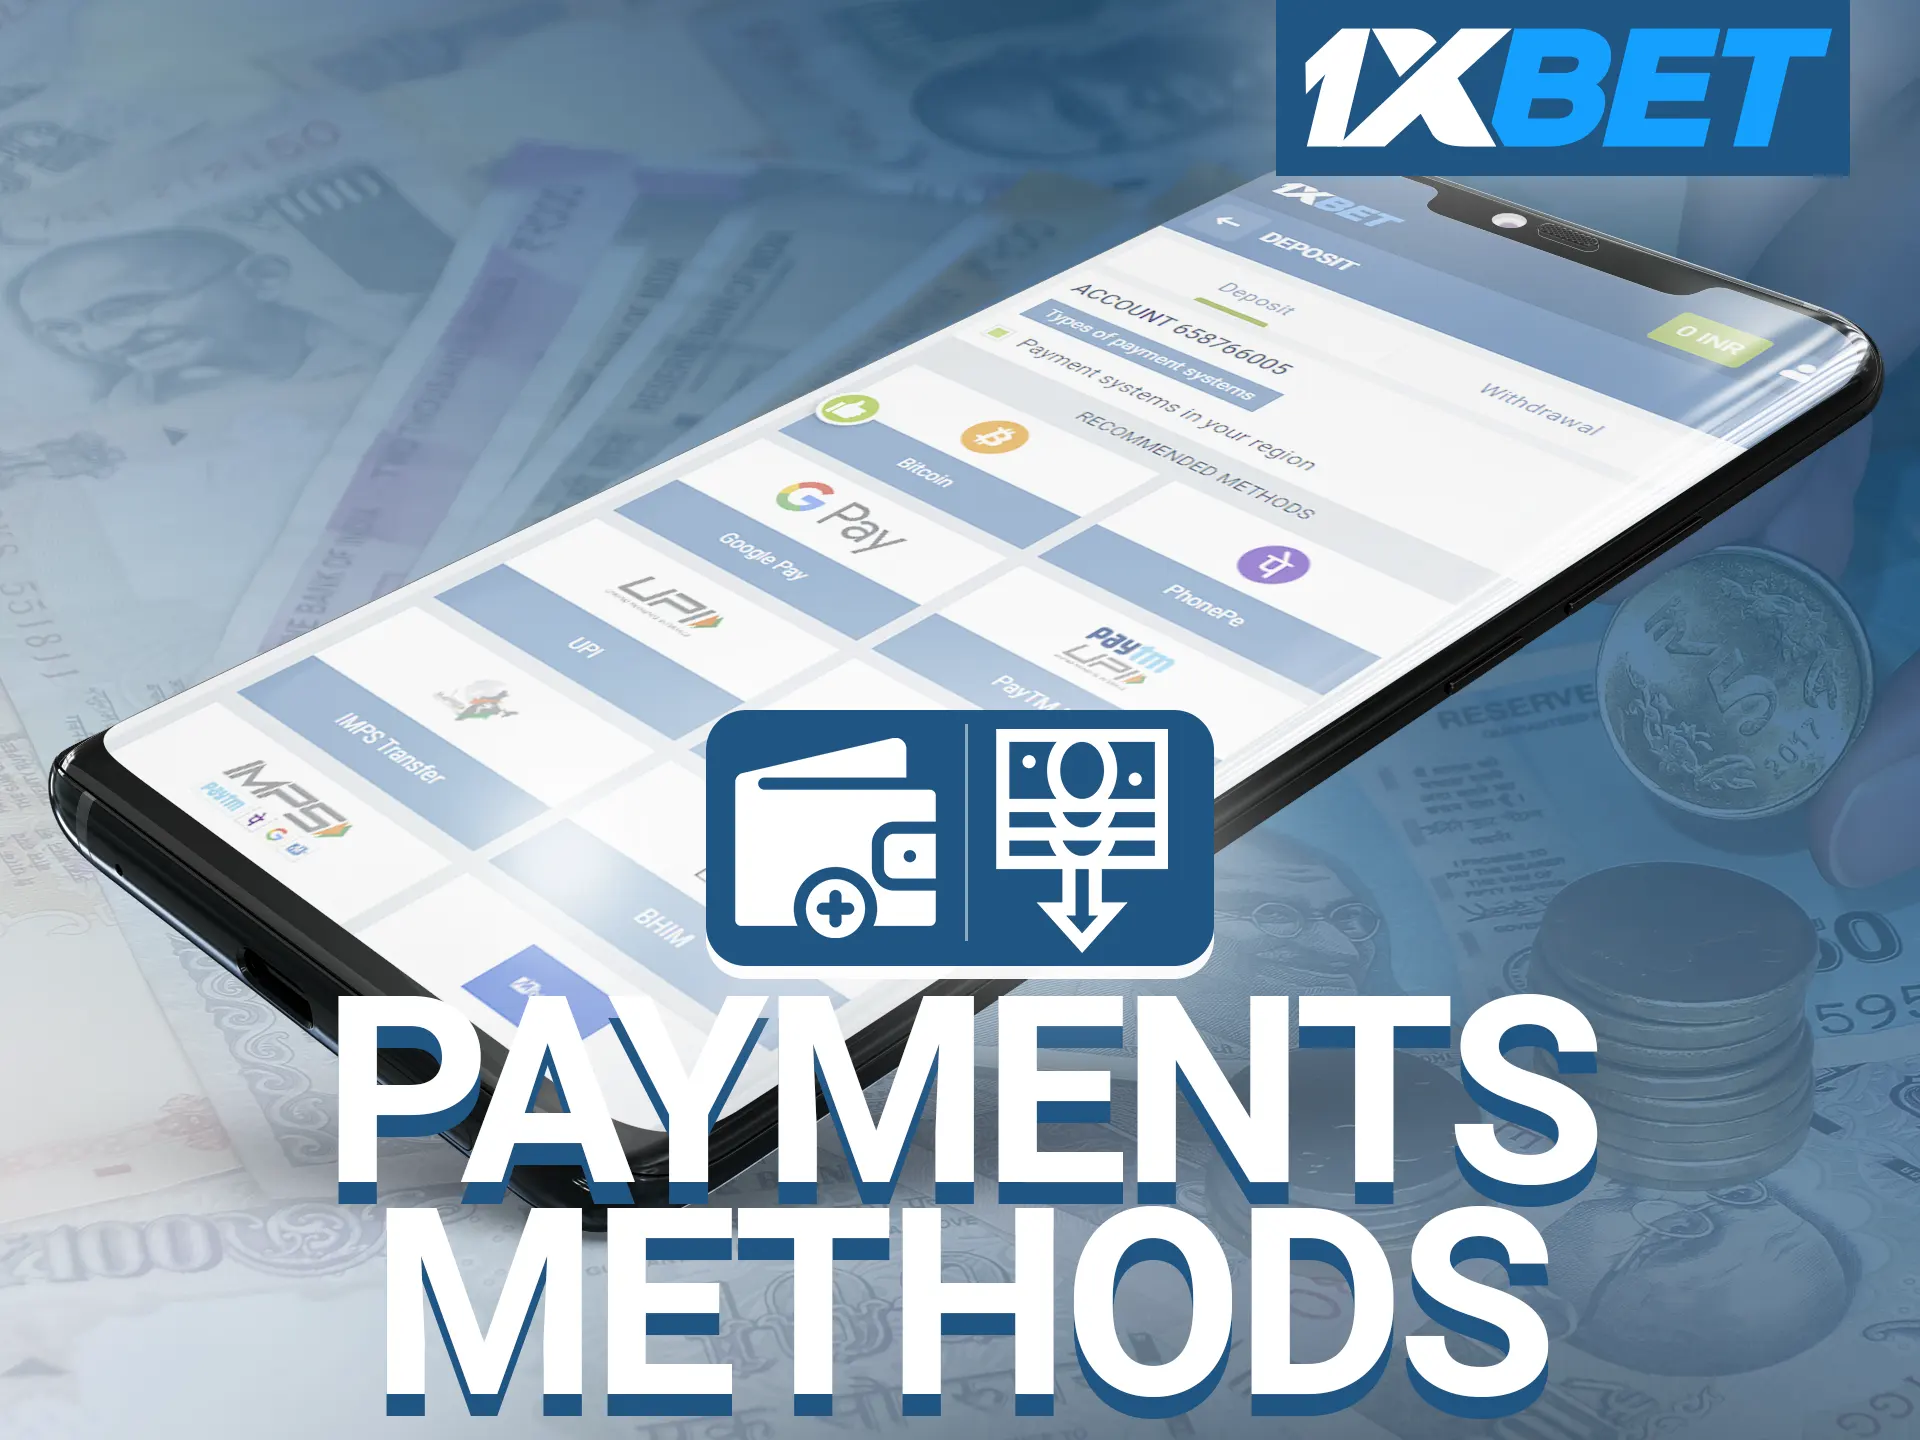 There are various payment methods available in the 1xbet app.